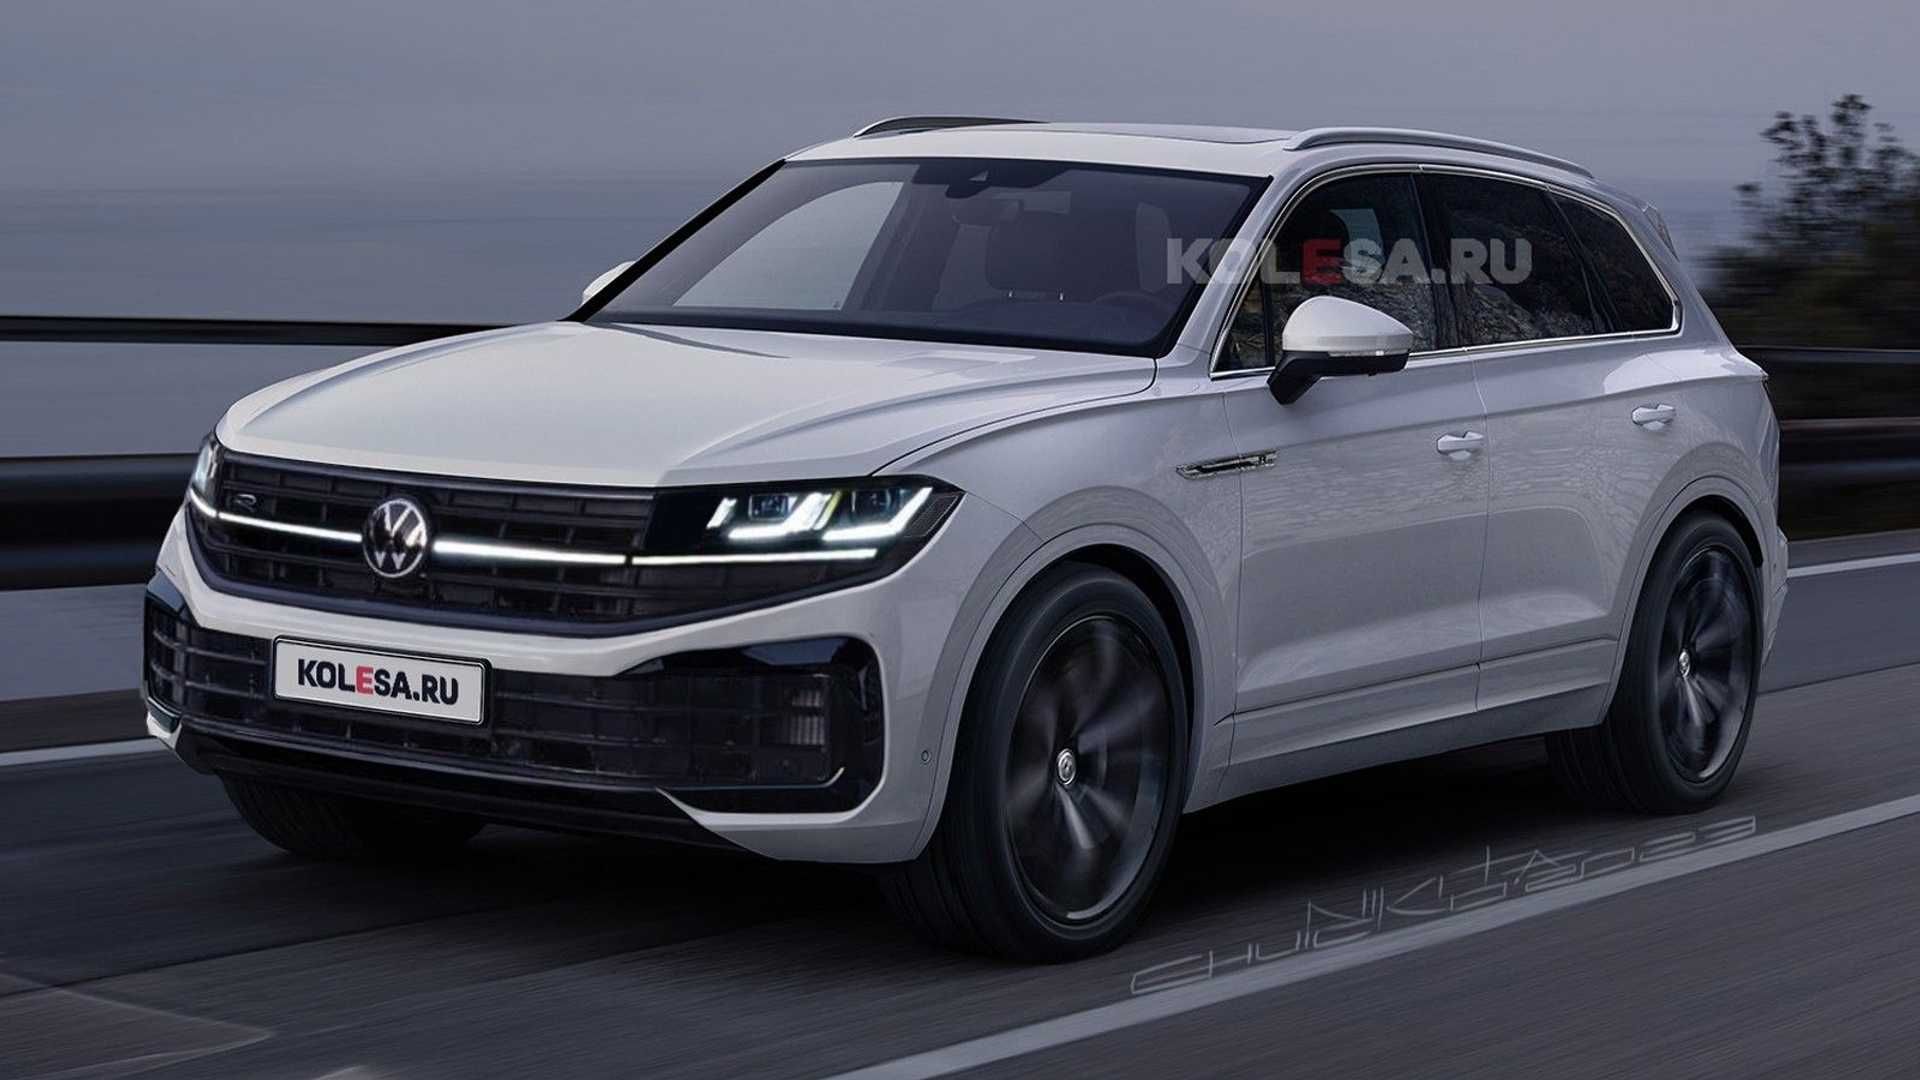 VW Touareg Getting Ready For Its Facelift With Updated Tech And Styling  Tweaks